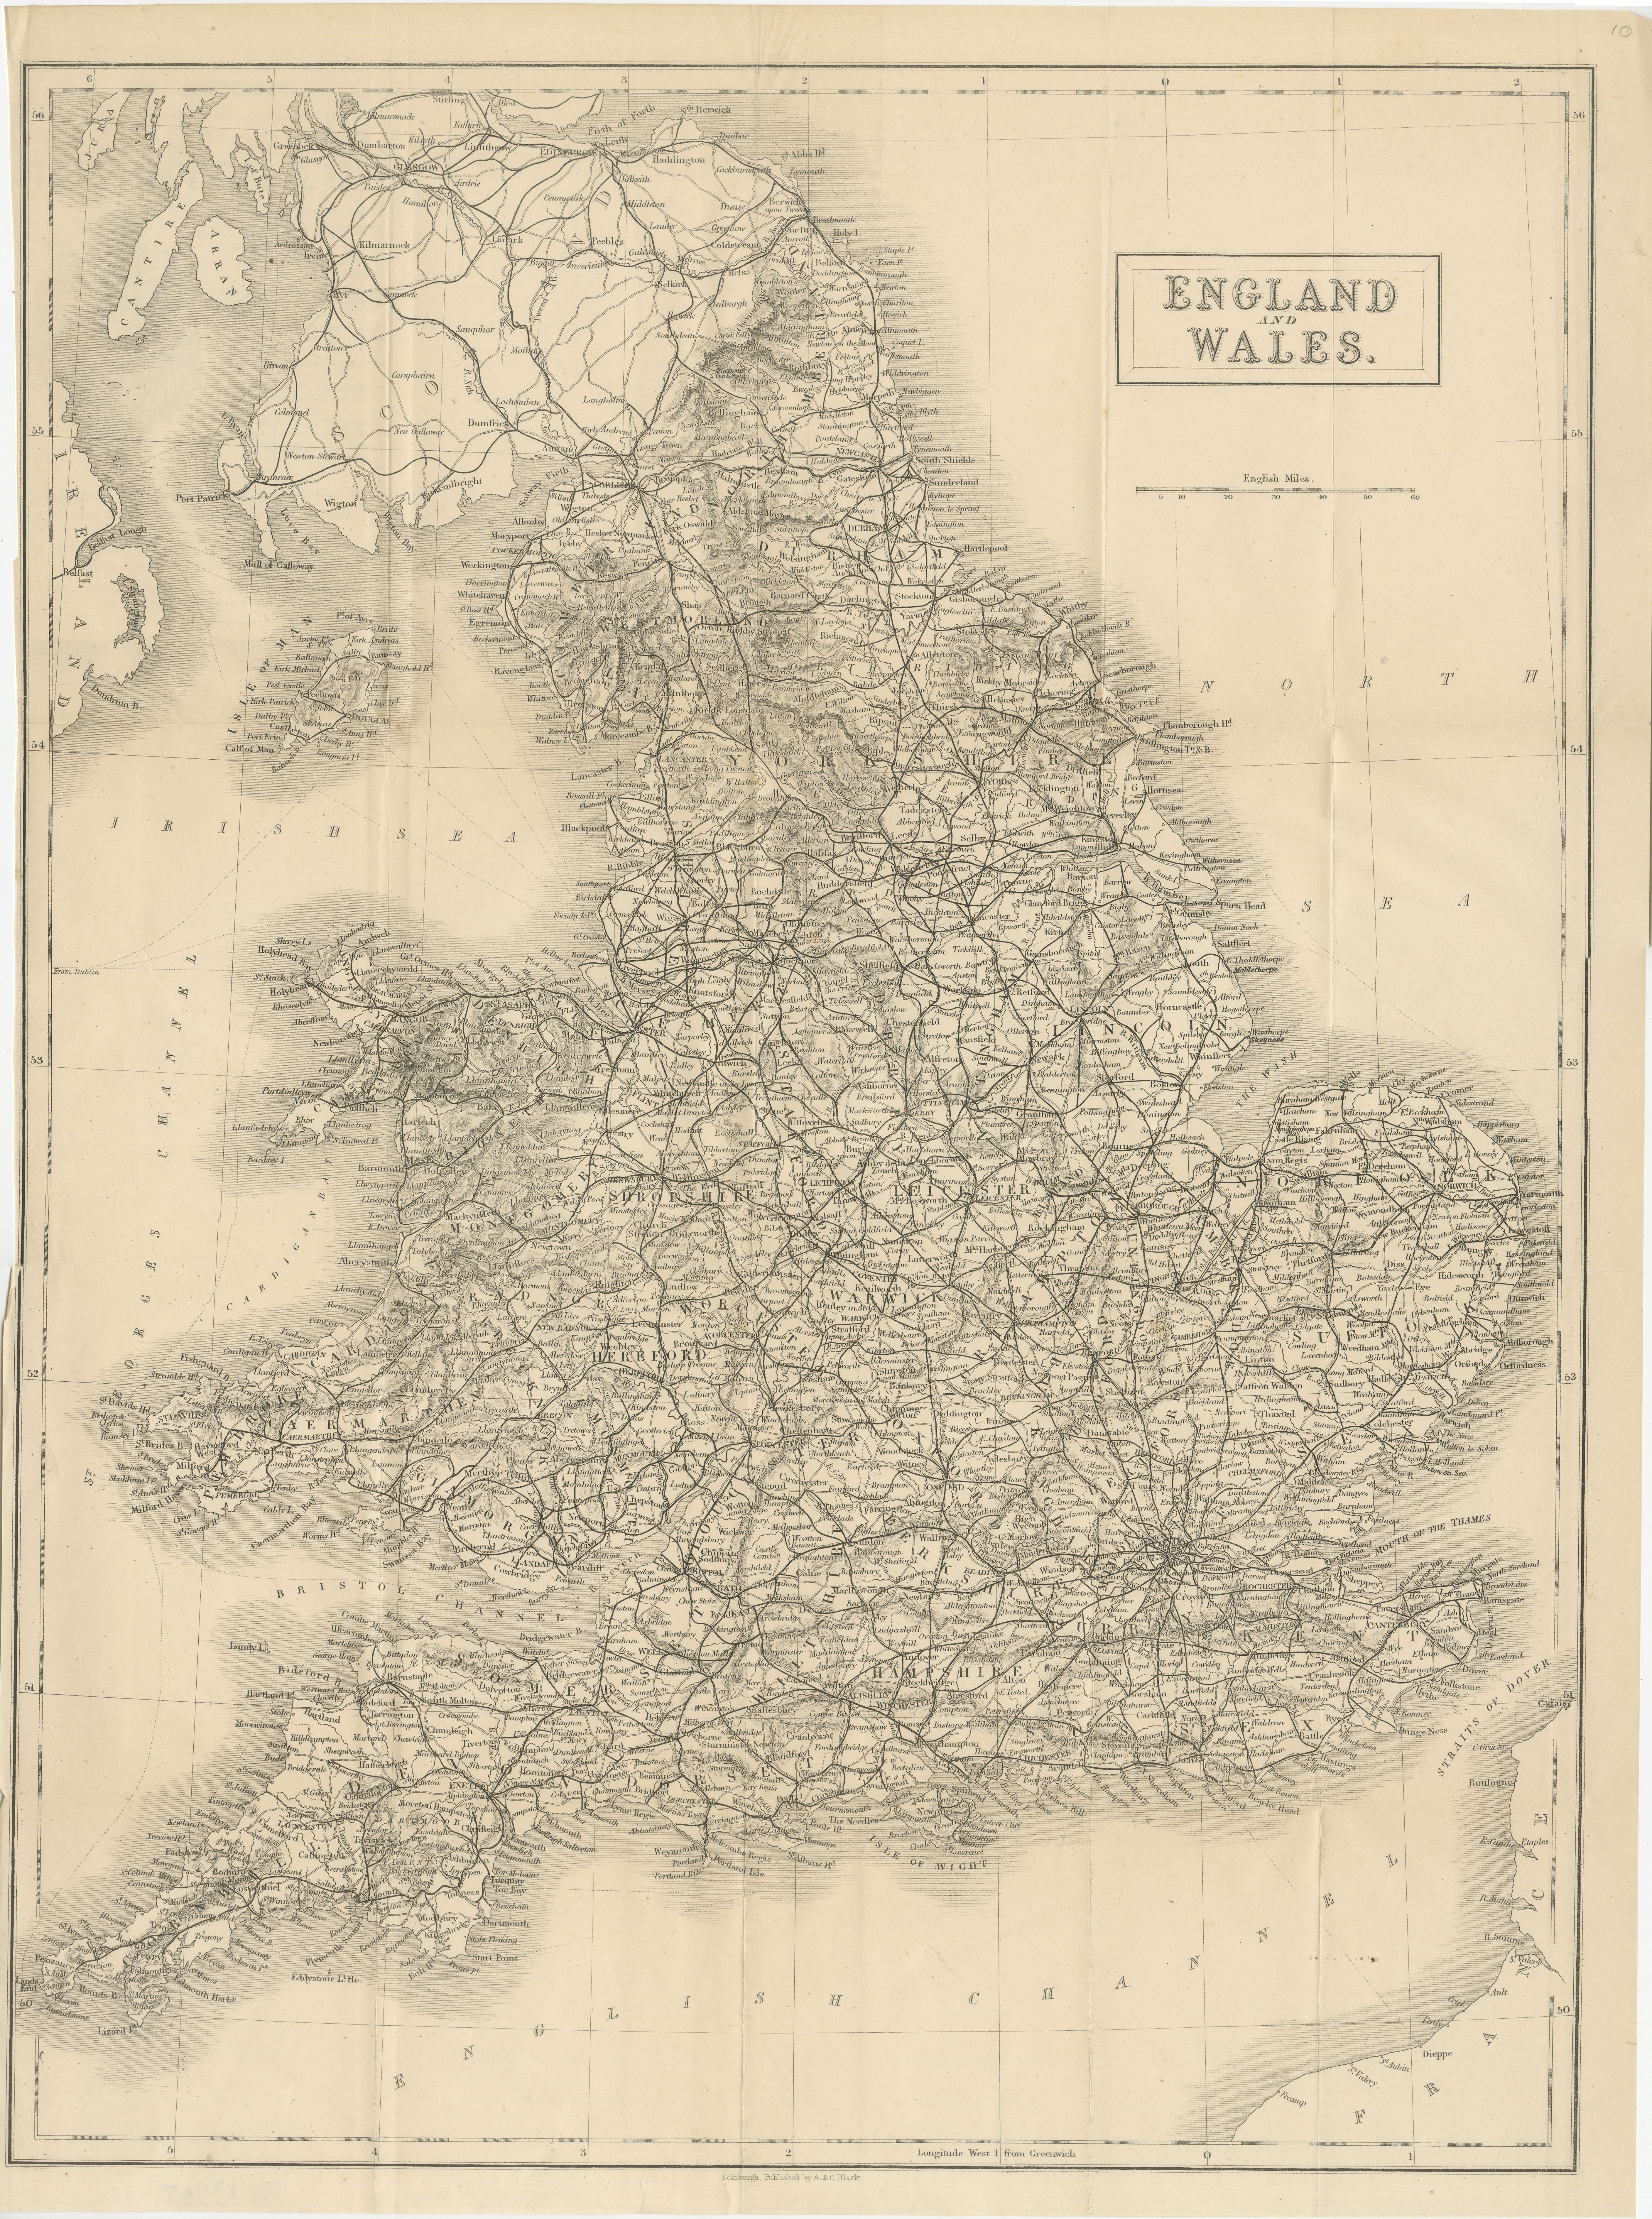 Antique map titled 'England and Wales'. Original folding map of England and Wales. Publishes by A. & C. Black, circa 1890.